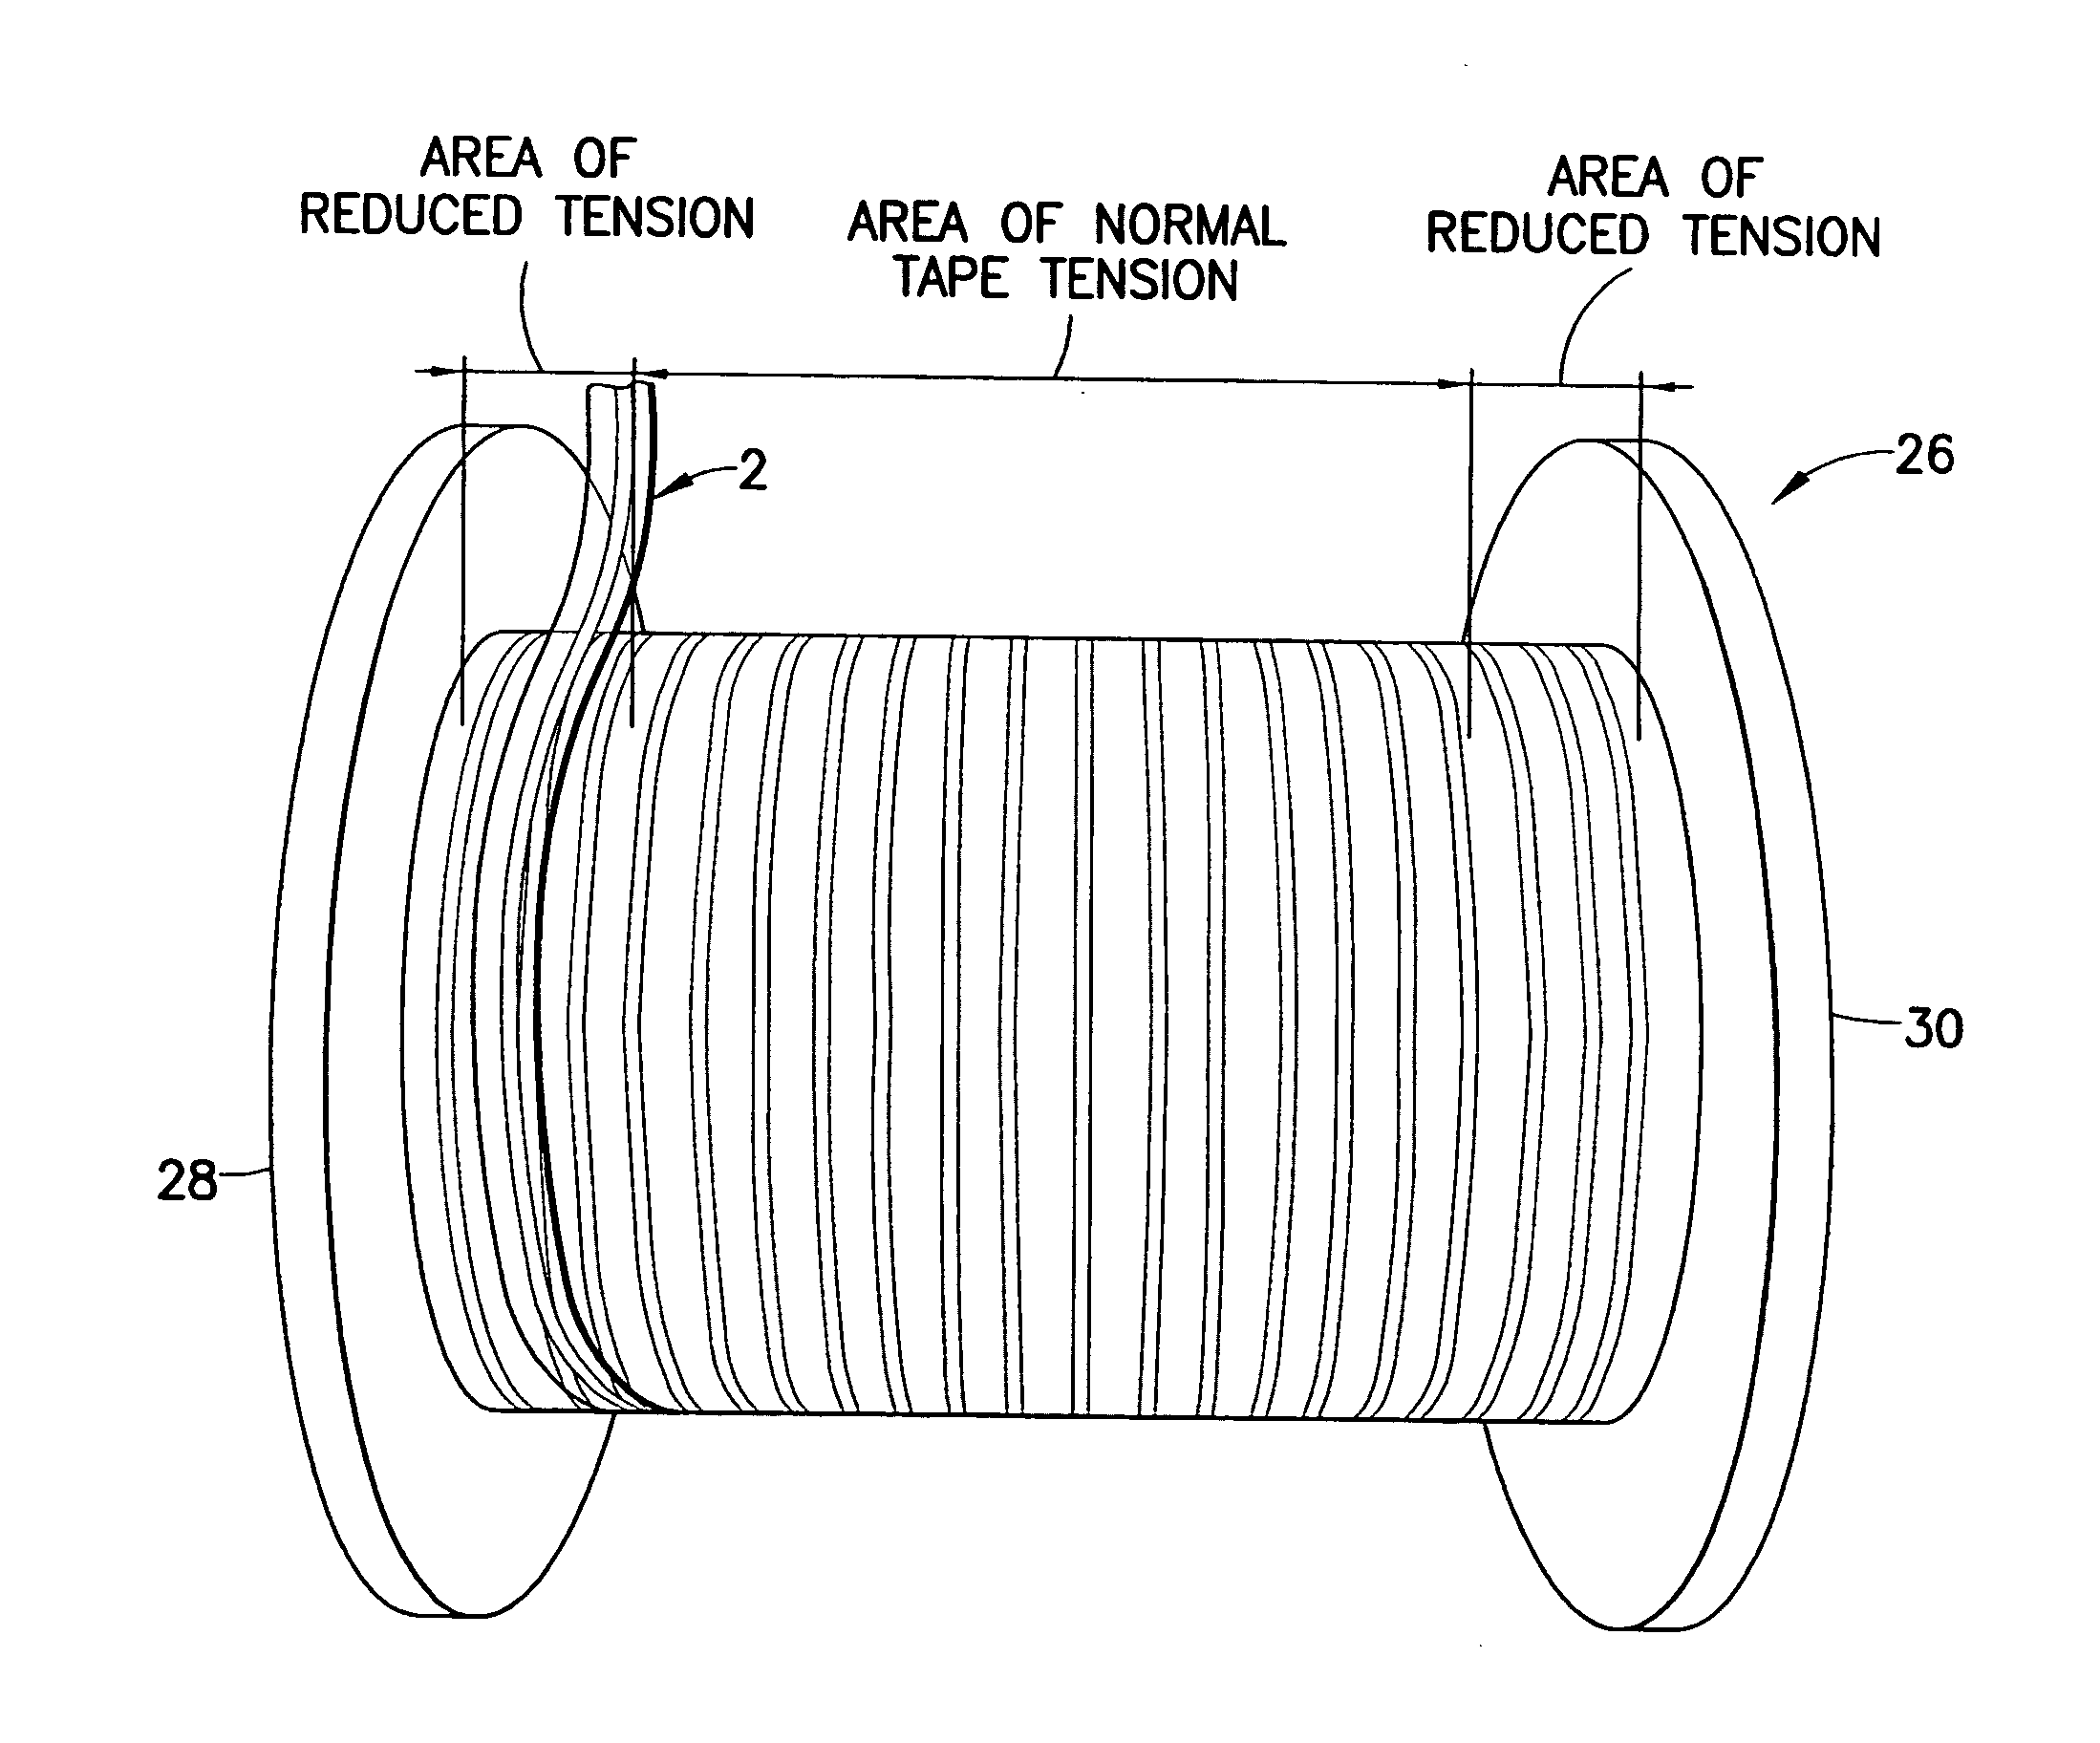 Method for reducing camber in coiled plastic ribbon or tape